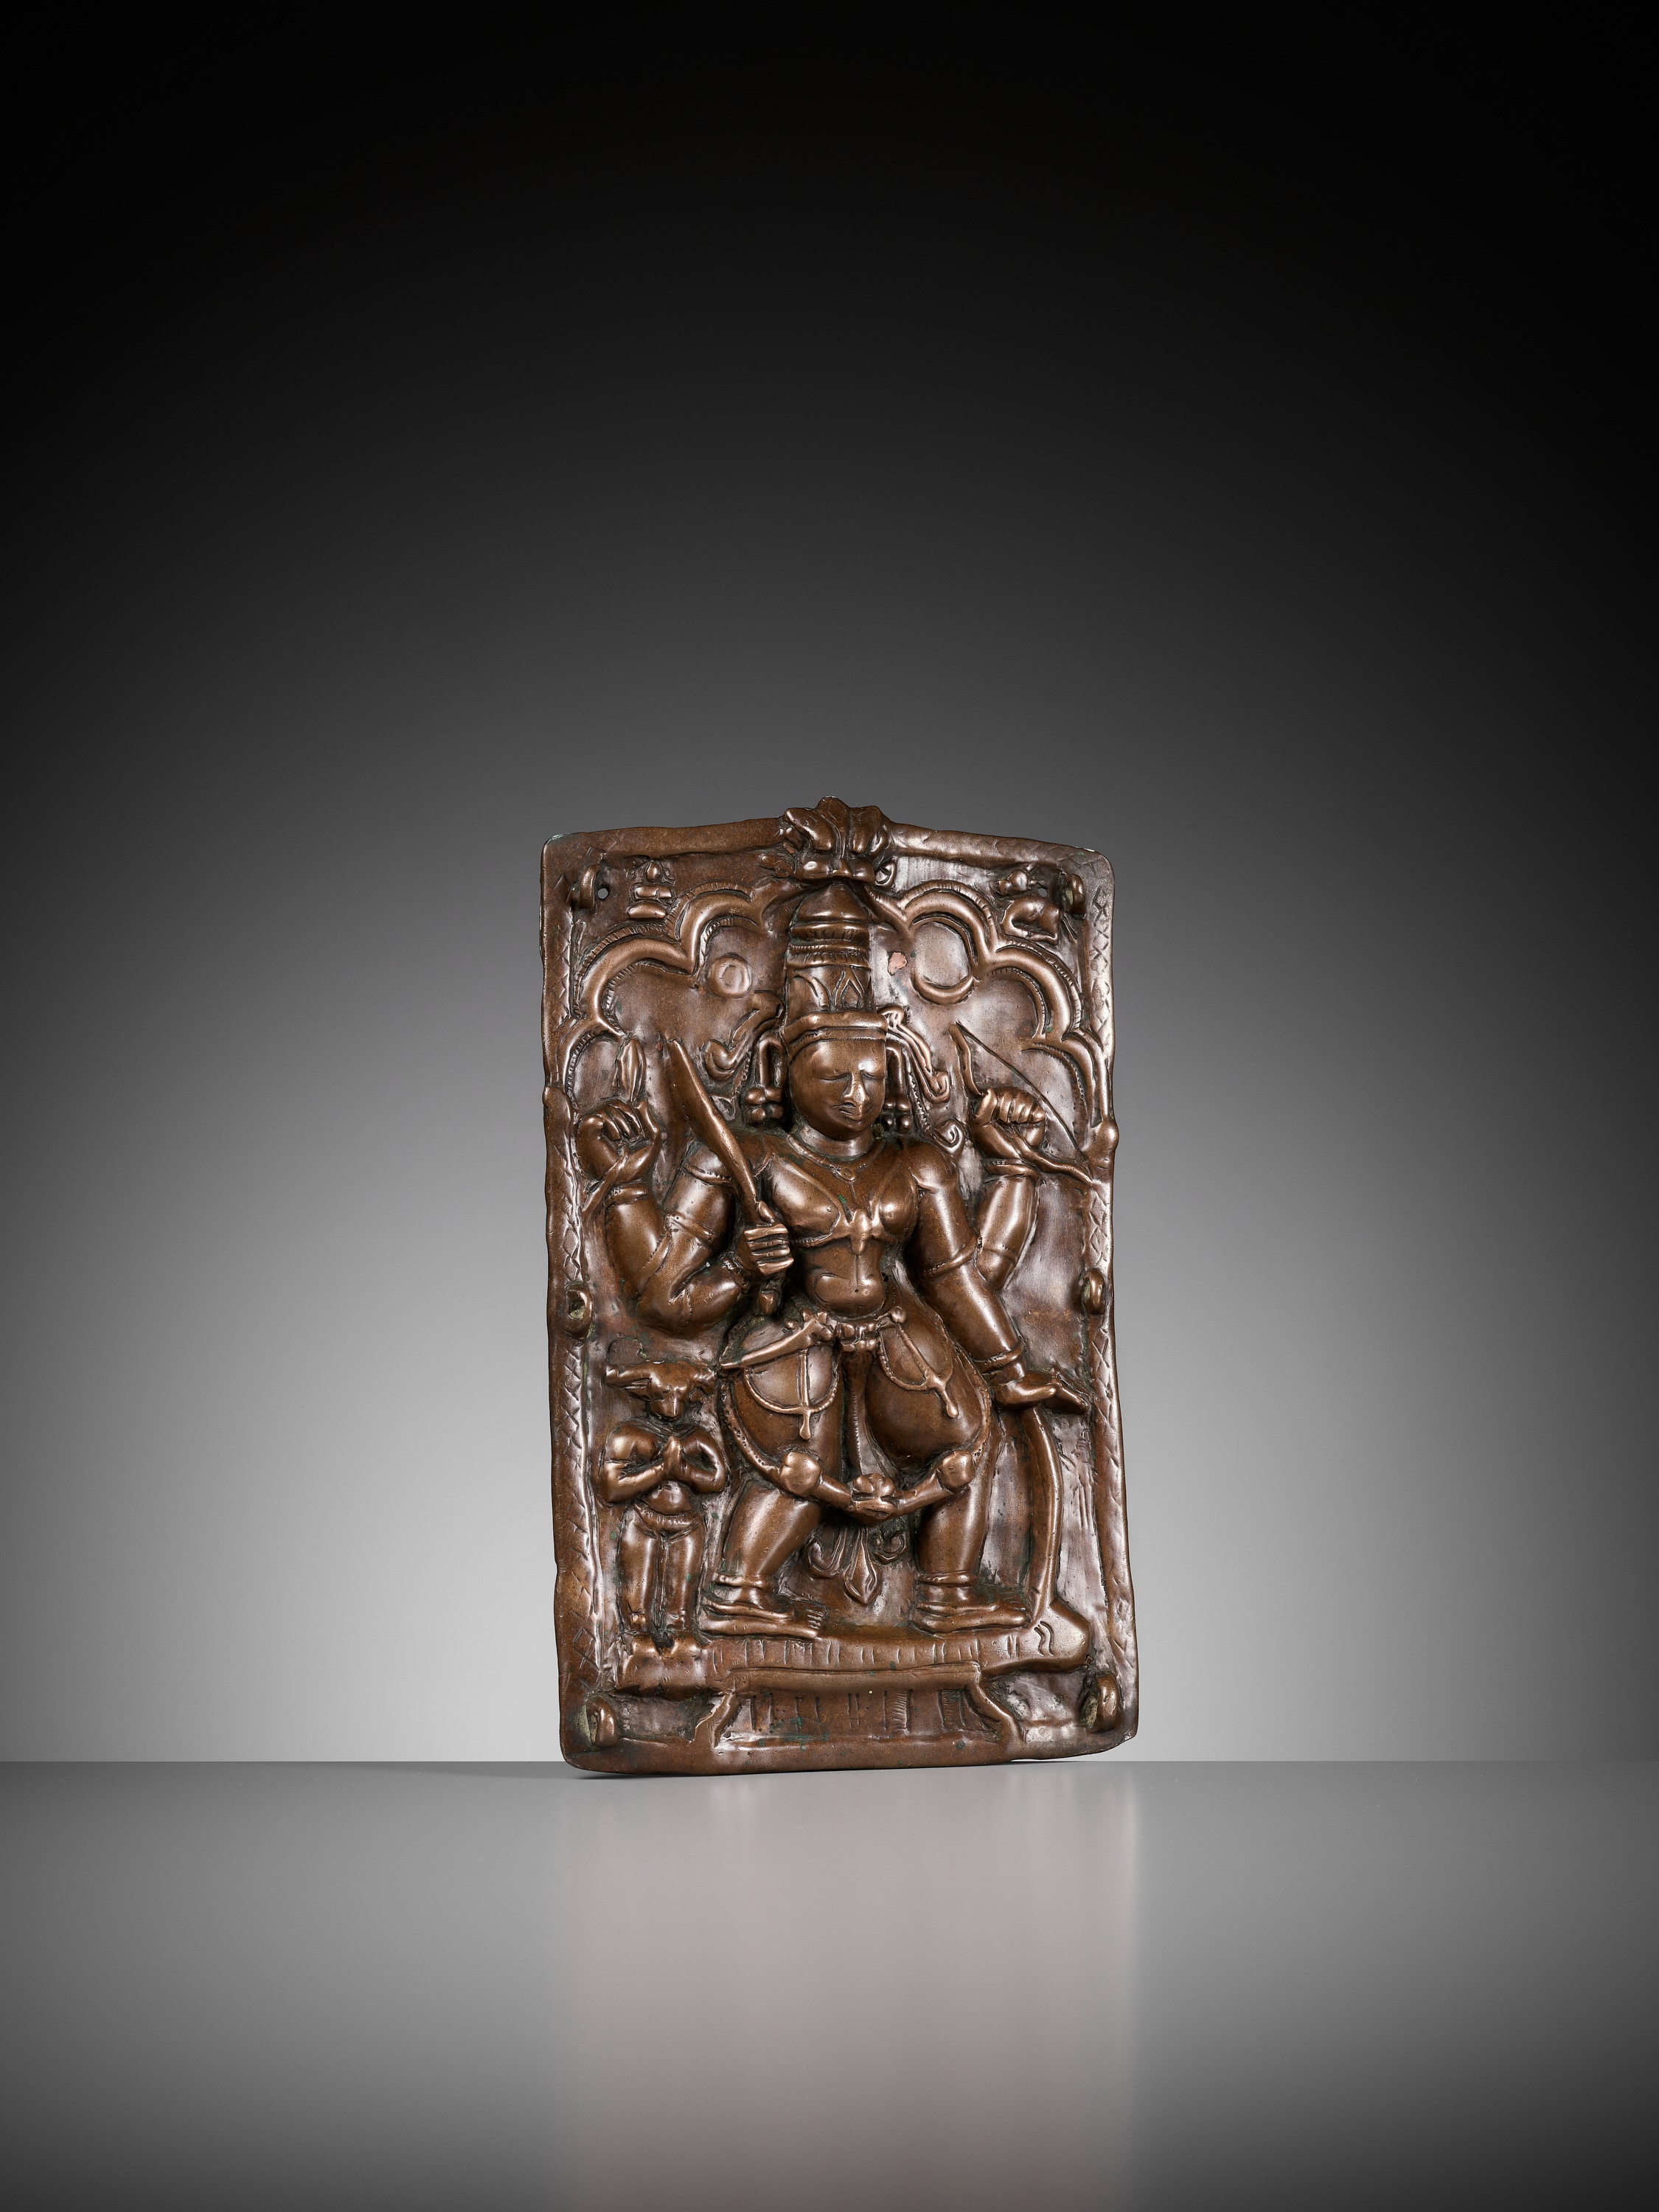 A CEREMONIAL COPPER SHIELD DEPICTING VIRABHADRA, 17TH-18TH CENTURY - Image 6 of 9